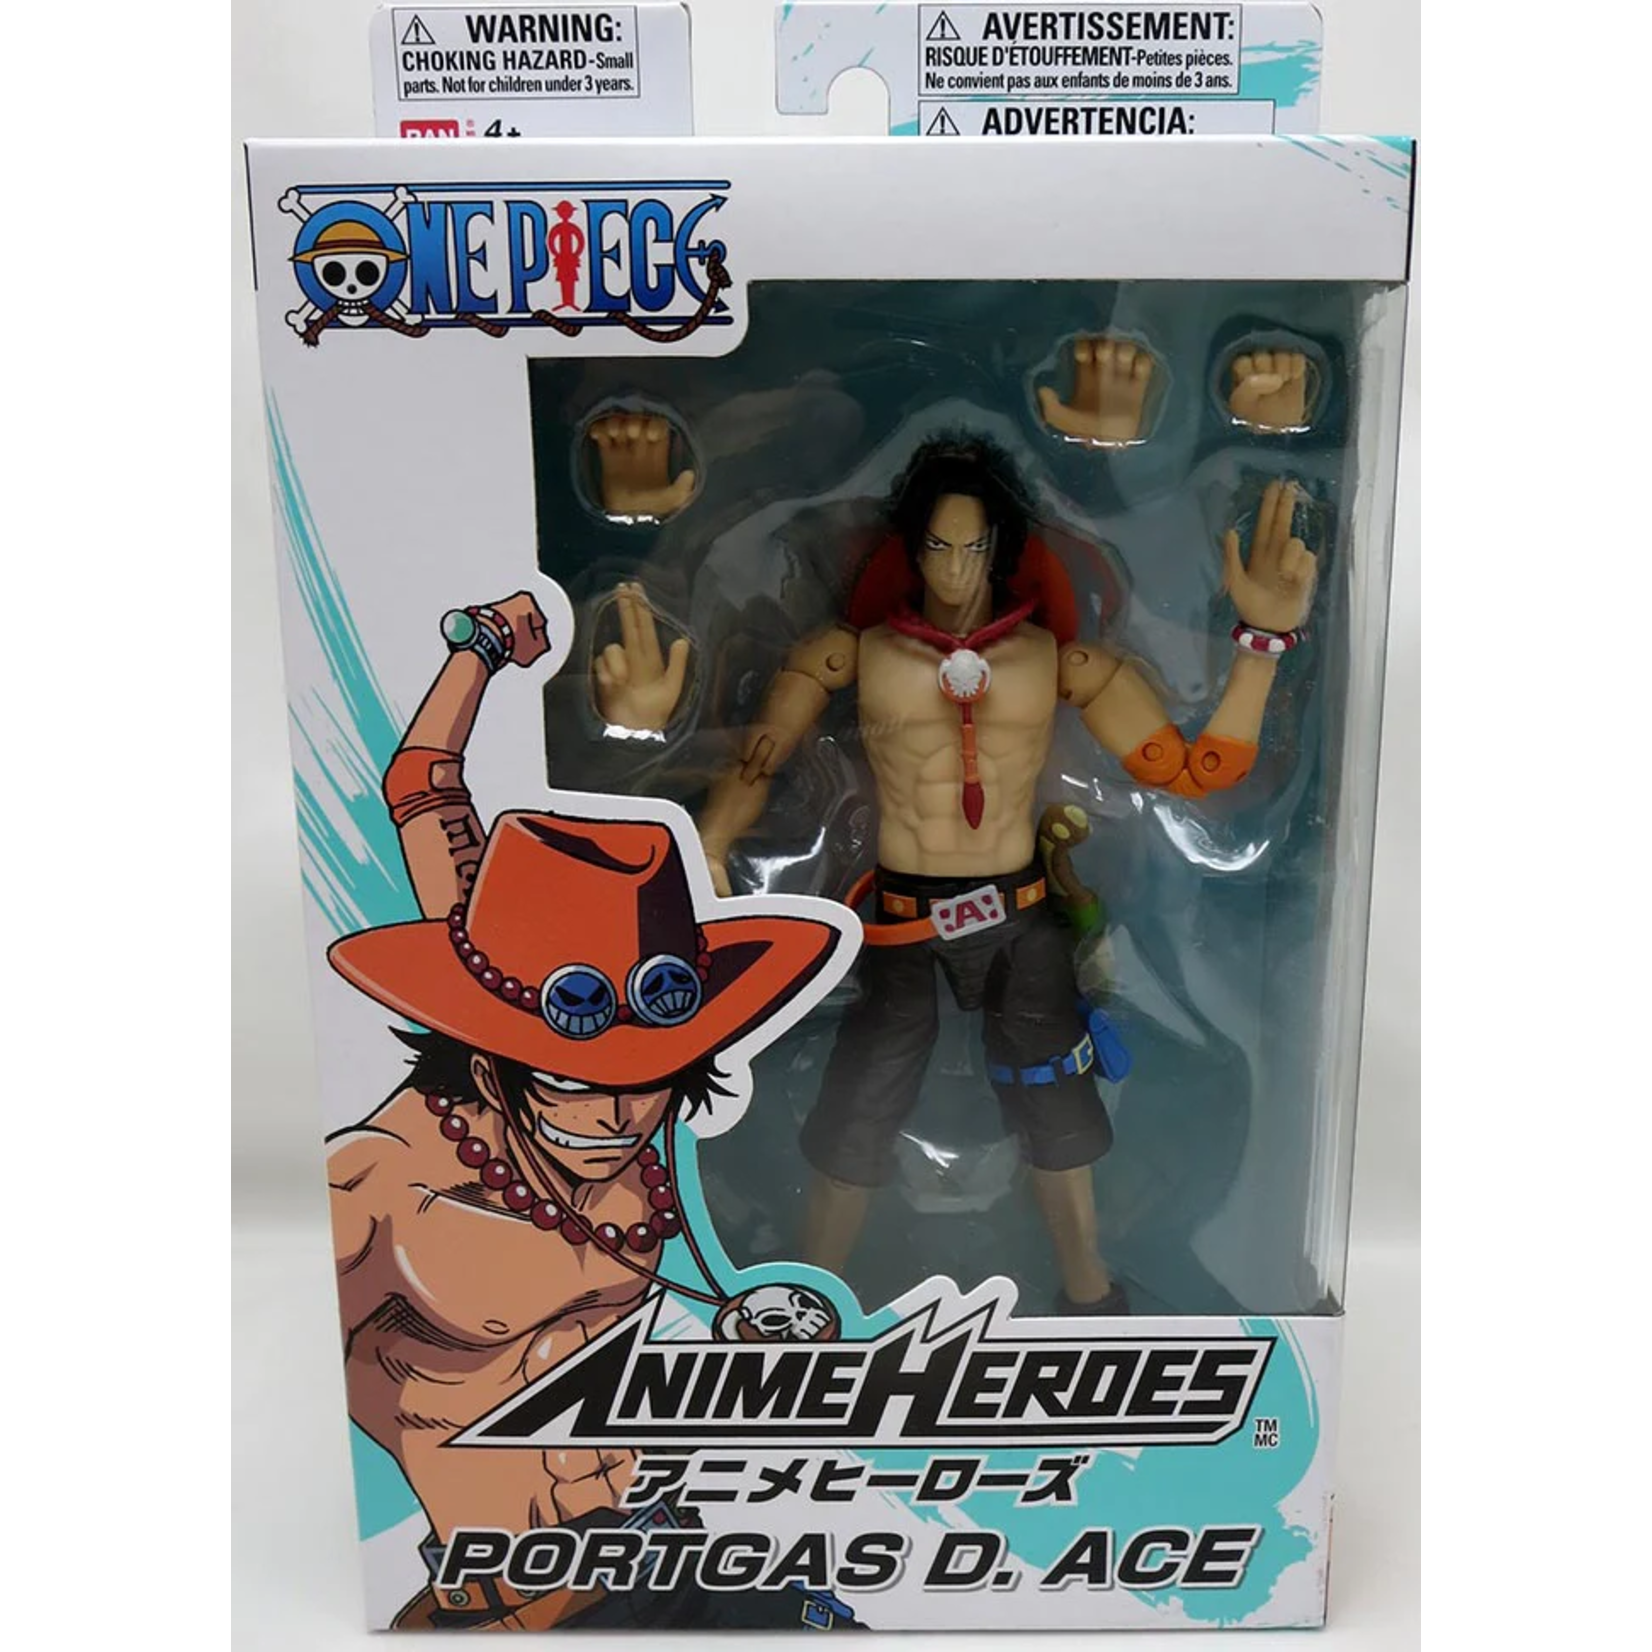 Bandai ANIME HEROES ONE PIECE - PORTGAS D. ACE